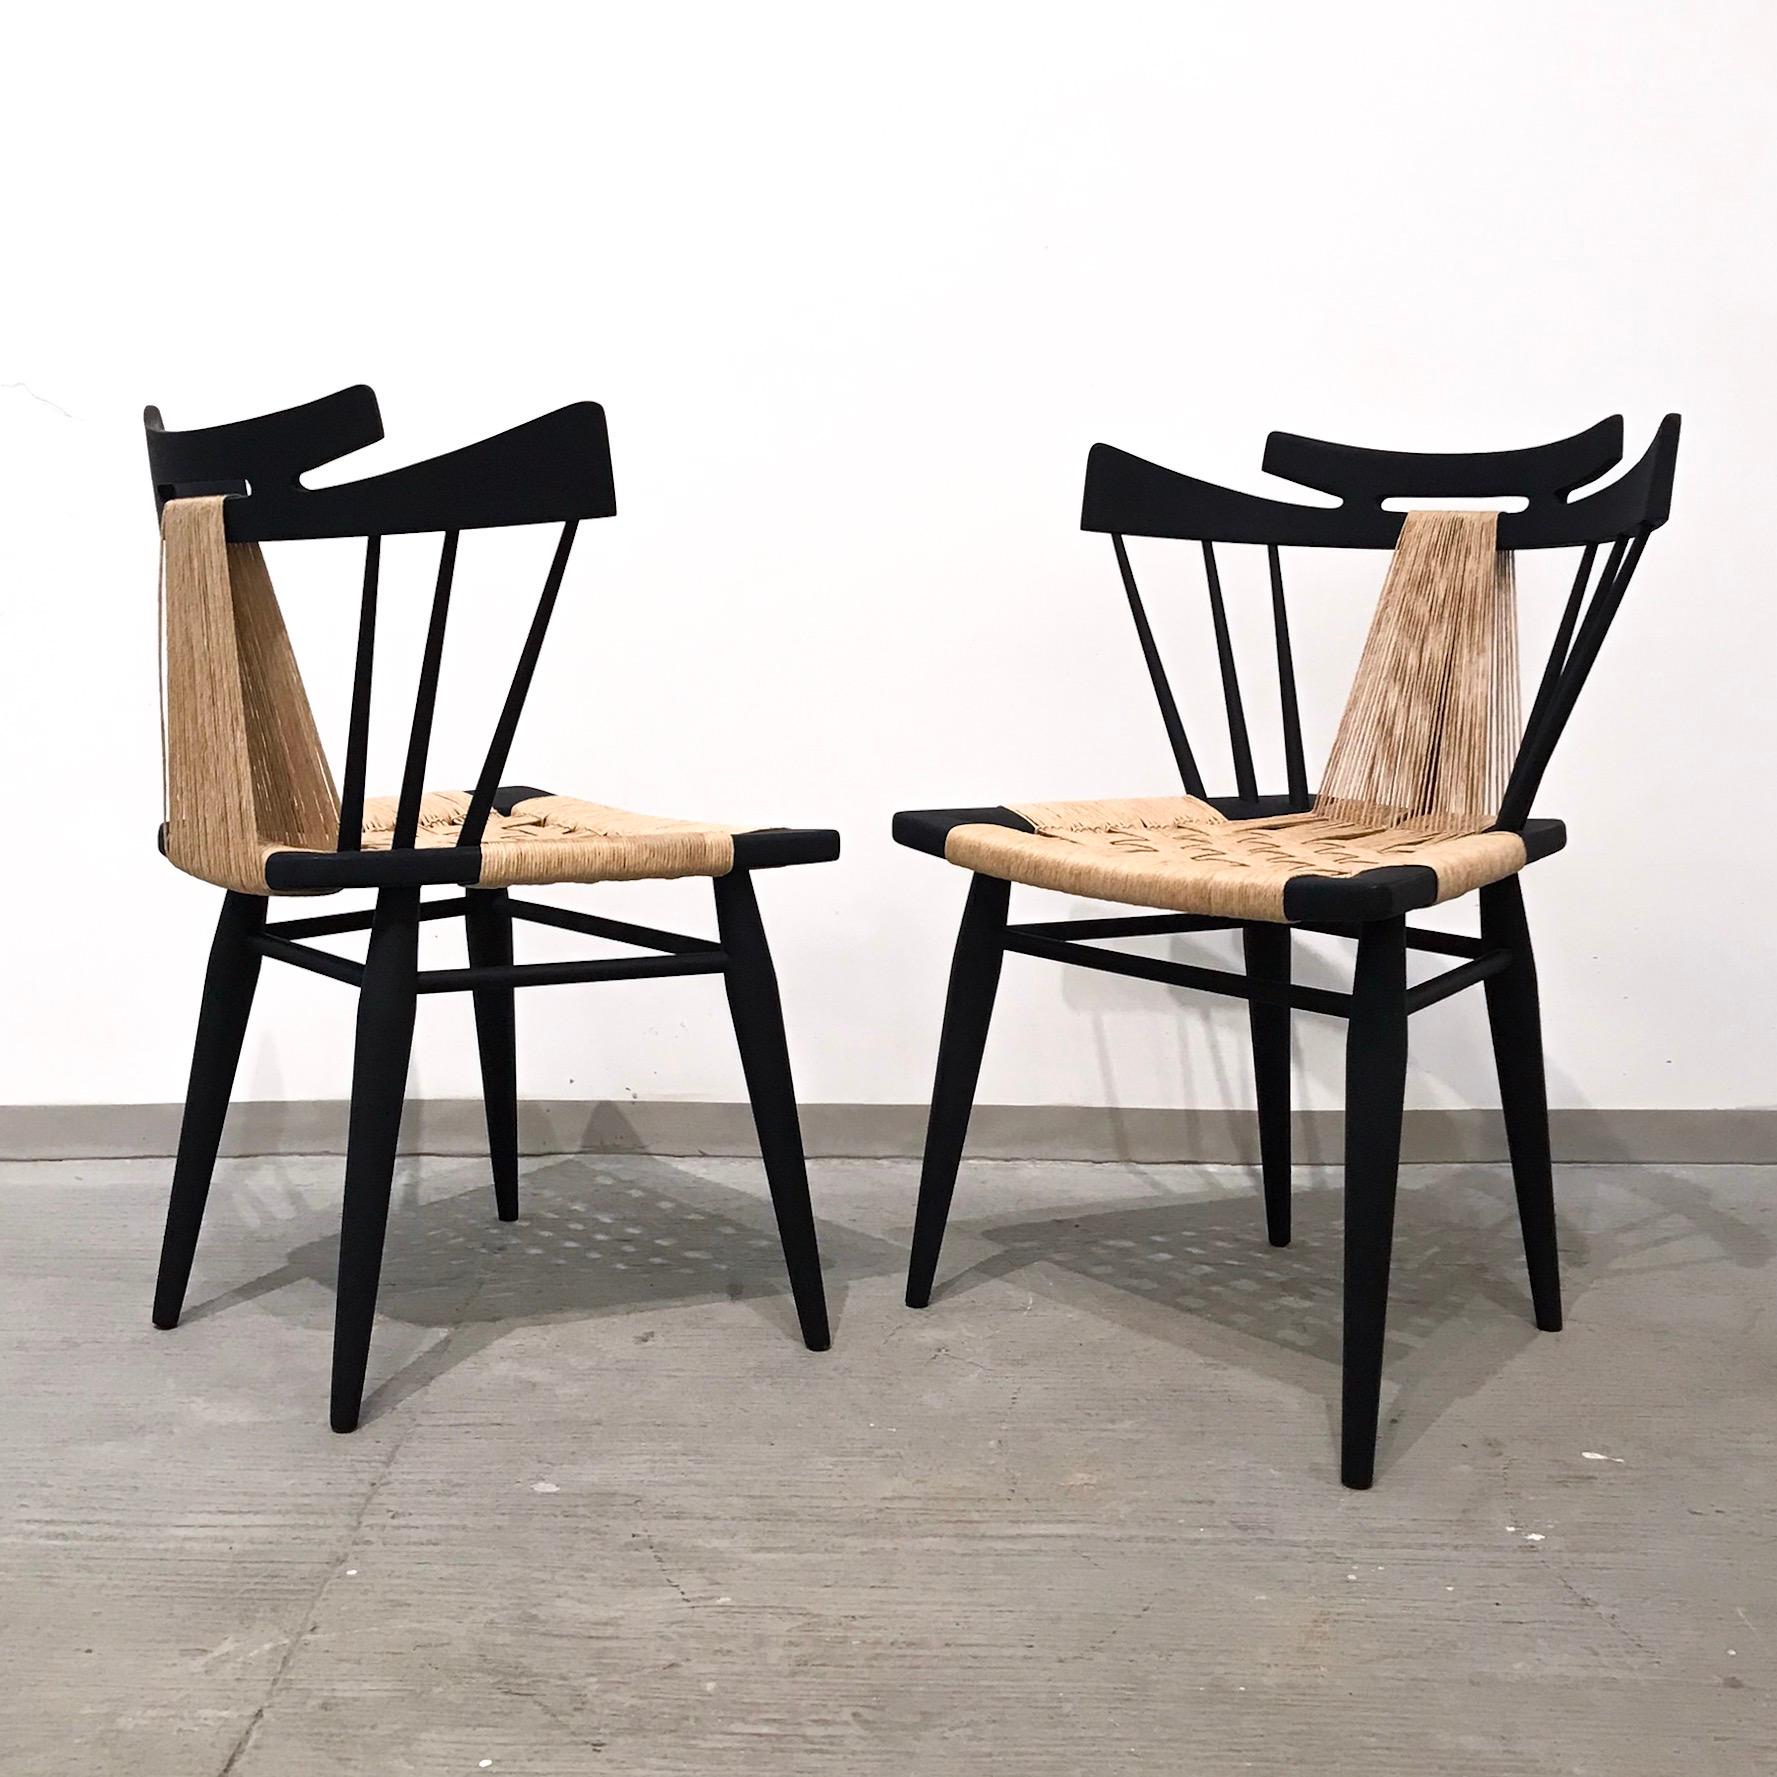 Mexican Edmond Spence Pair of Chairs